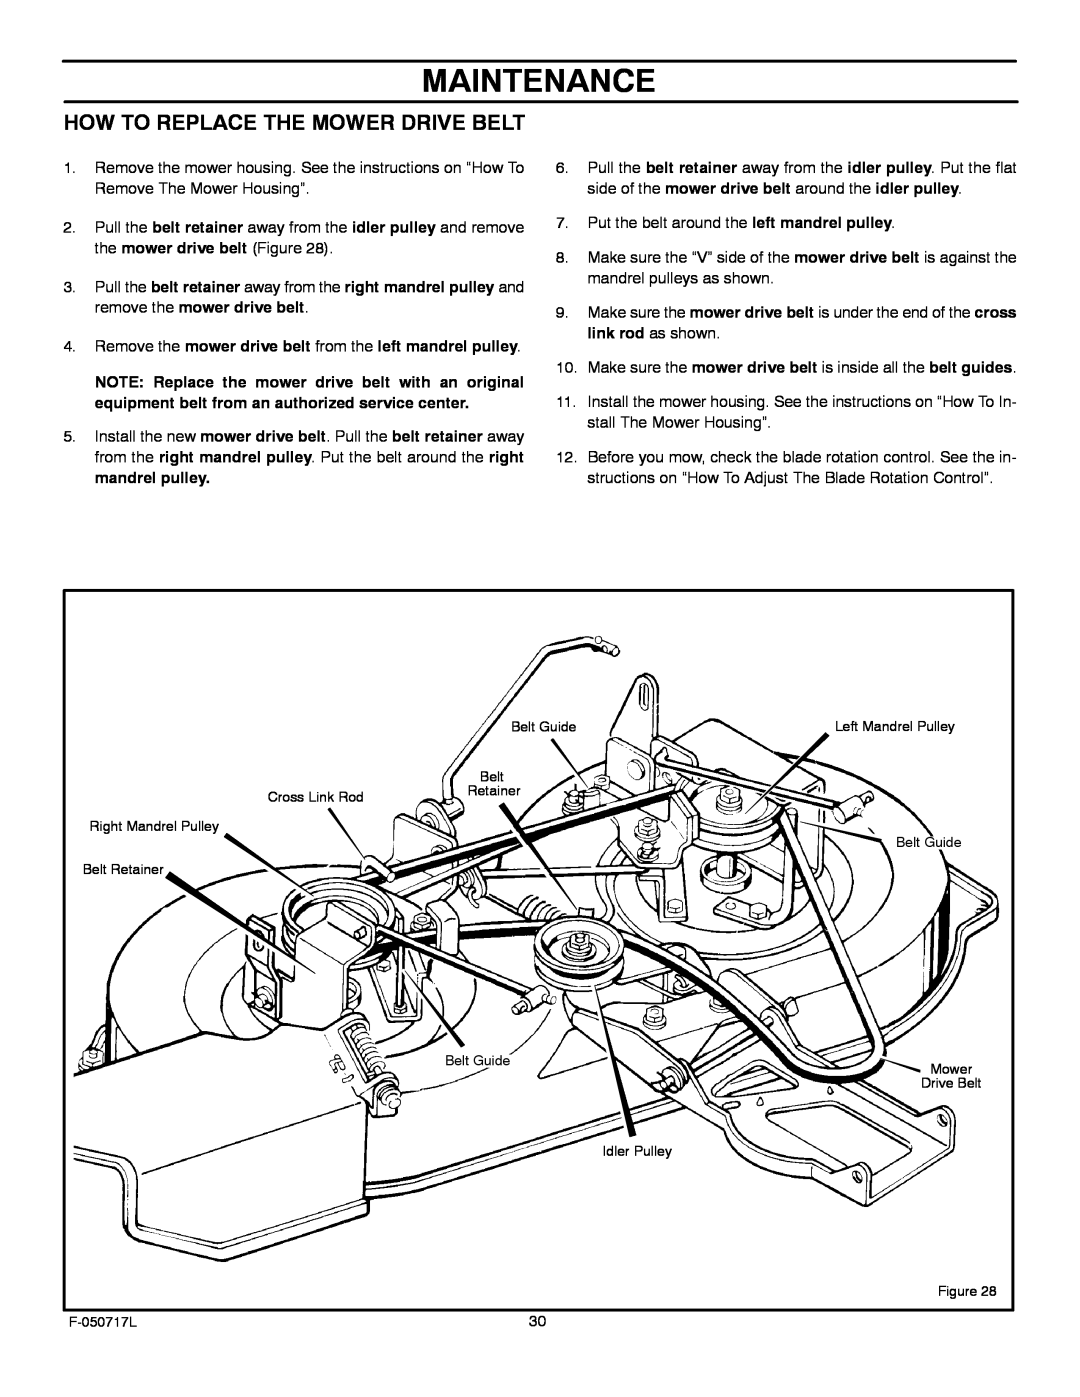 Murray 387002x92D manual Maintenance, How To Replace The Mower Drive Belt 